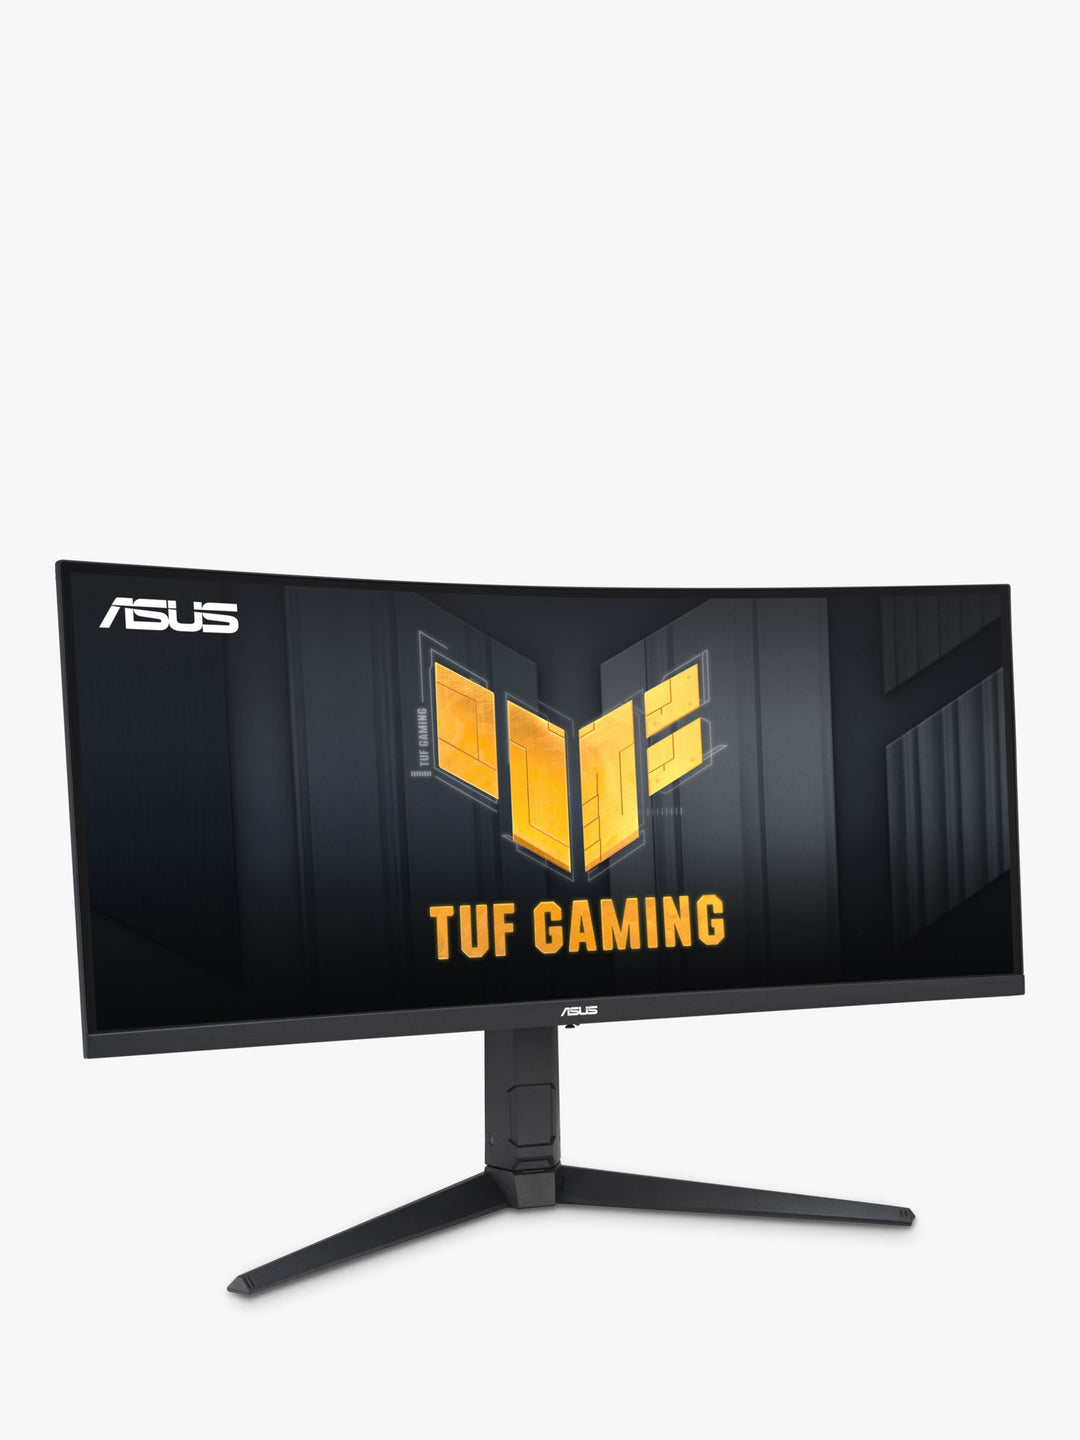 ASUS TUF Gaming Monitor 34" WQHD Curved HDR 100Hz, Extreme Low Motion Blur, Ergonomic Design with Multiple Ports